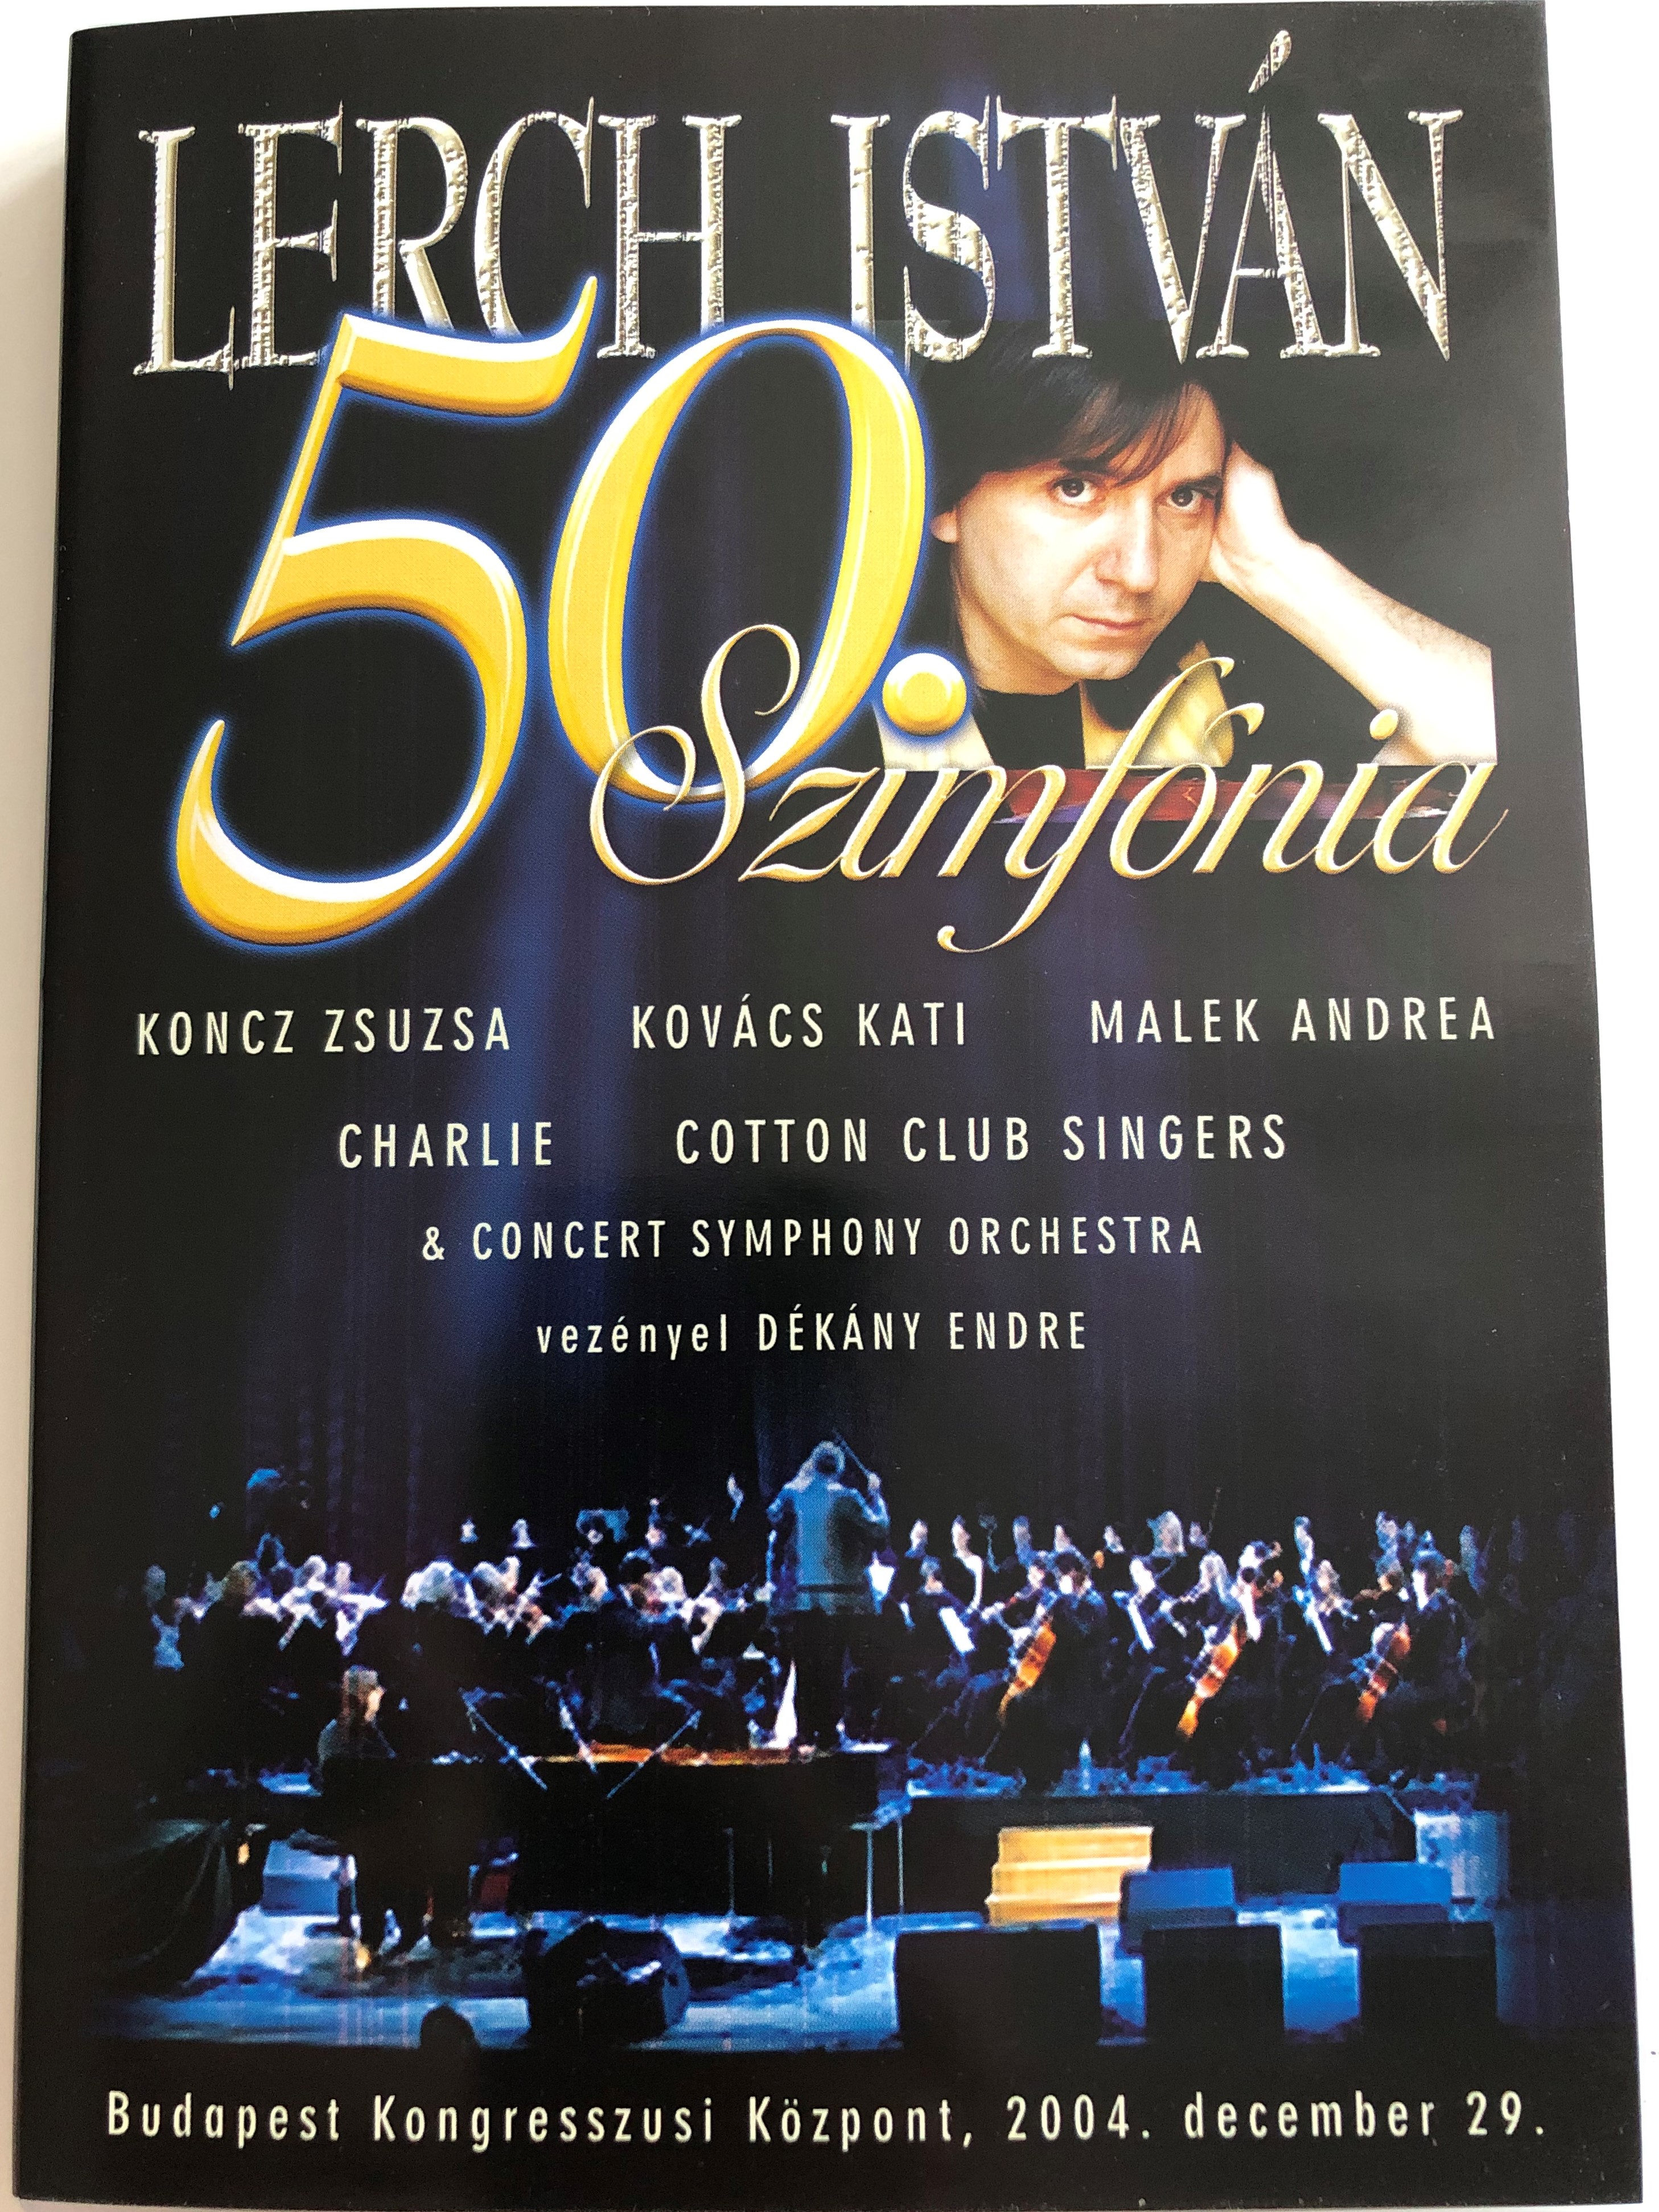 lerch-istv-n-50.-szimf-nia-dvd-2005-koncz-zsuzsa-kov-cs-kati-malek-andrea-charlie-cotton-club-singers-concert-symphony-orchestra-conducted-by-d-k-ny-endre-recorded-in-budapest-congressional-center-2004-1-.jpg